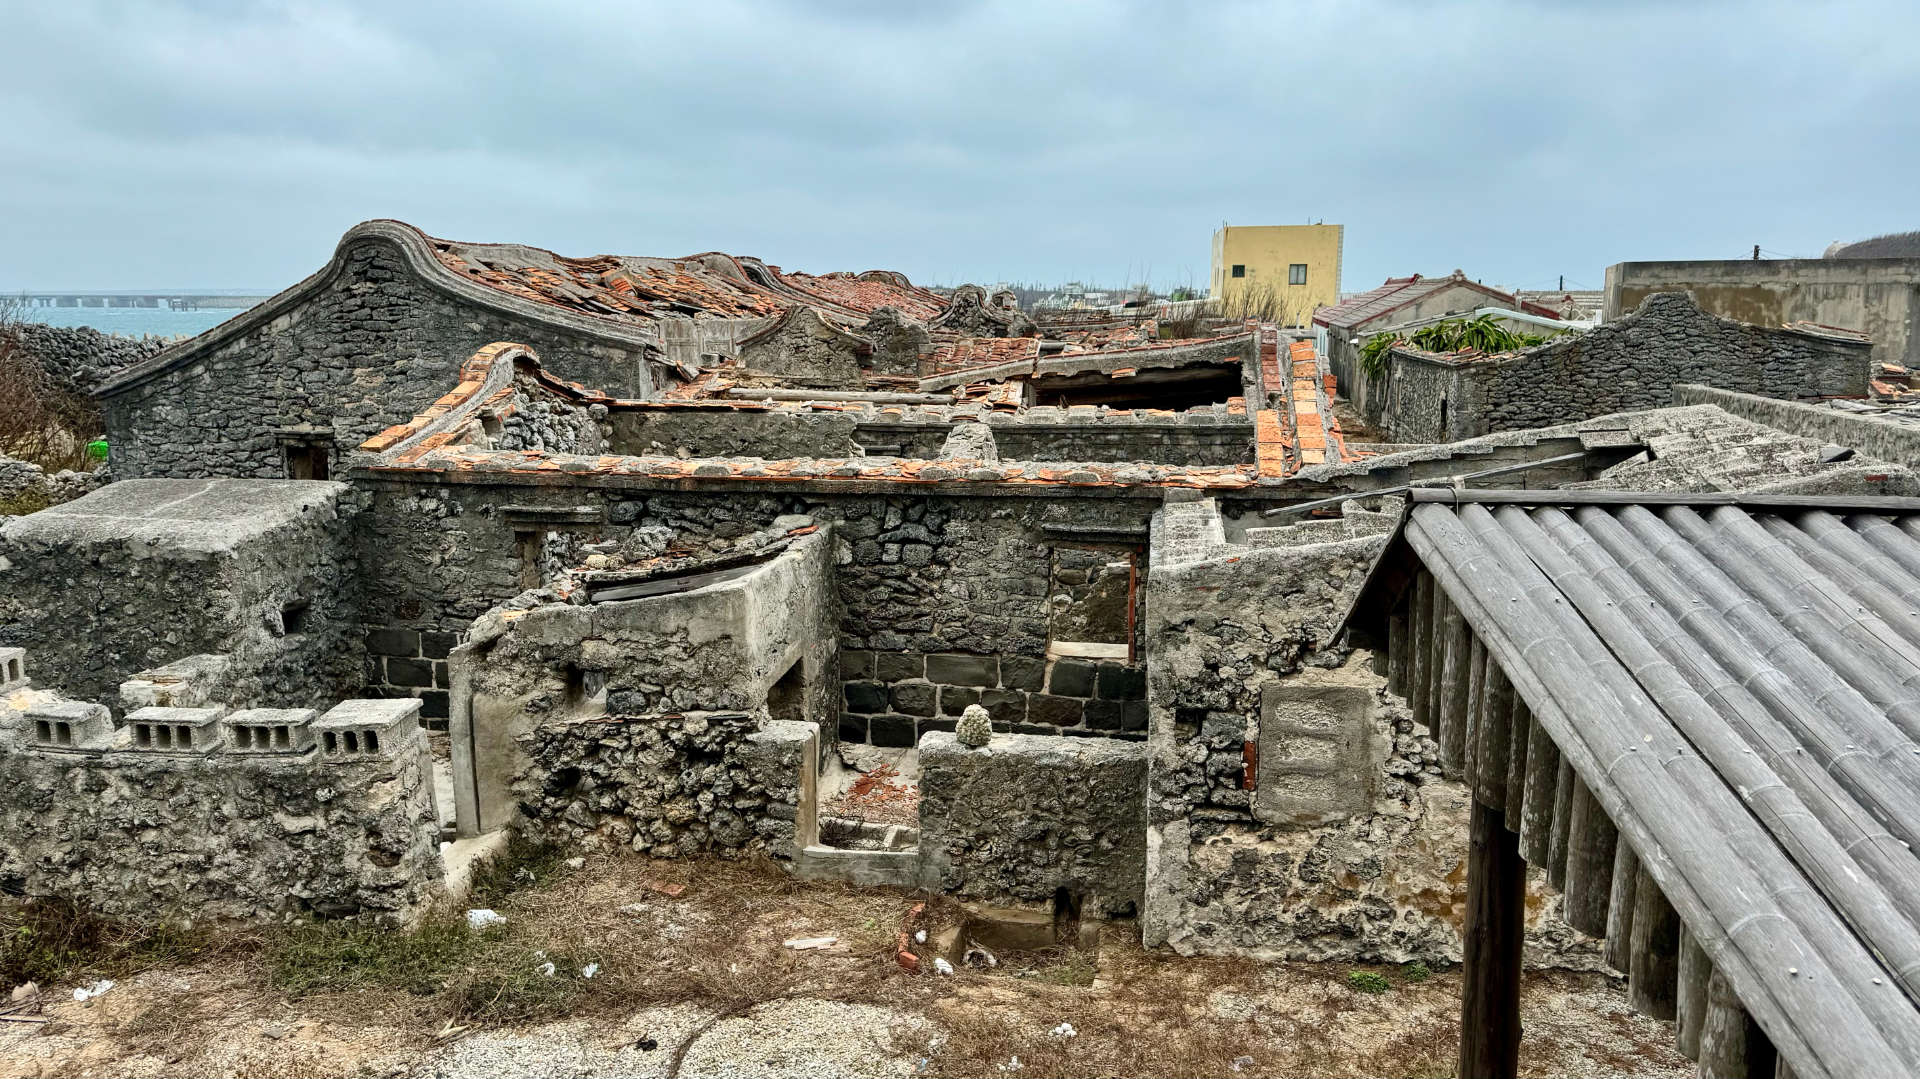 Abandoned village on Xiyu Island. The buildings are constructed of stone and coral.